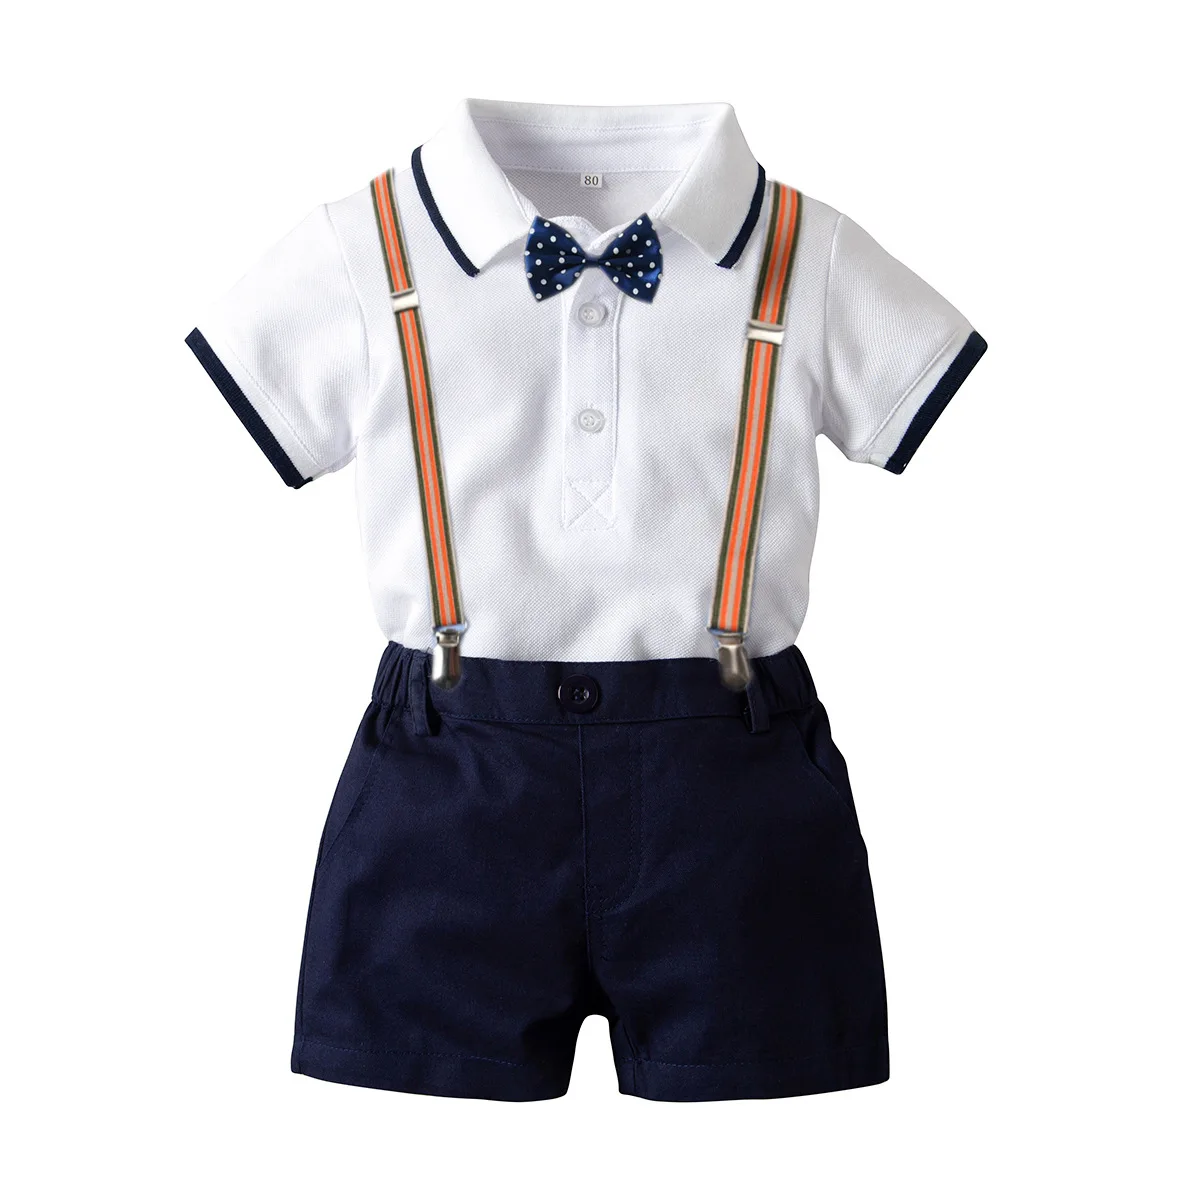 Viworld Baby Boy Gentleman Clothes Infant Boy Bow Tie Short Sleeve Letter Romper Camo Shorts Set Summer Outfit 